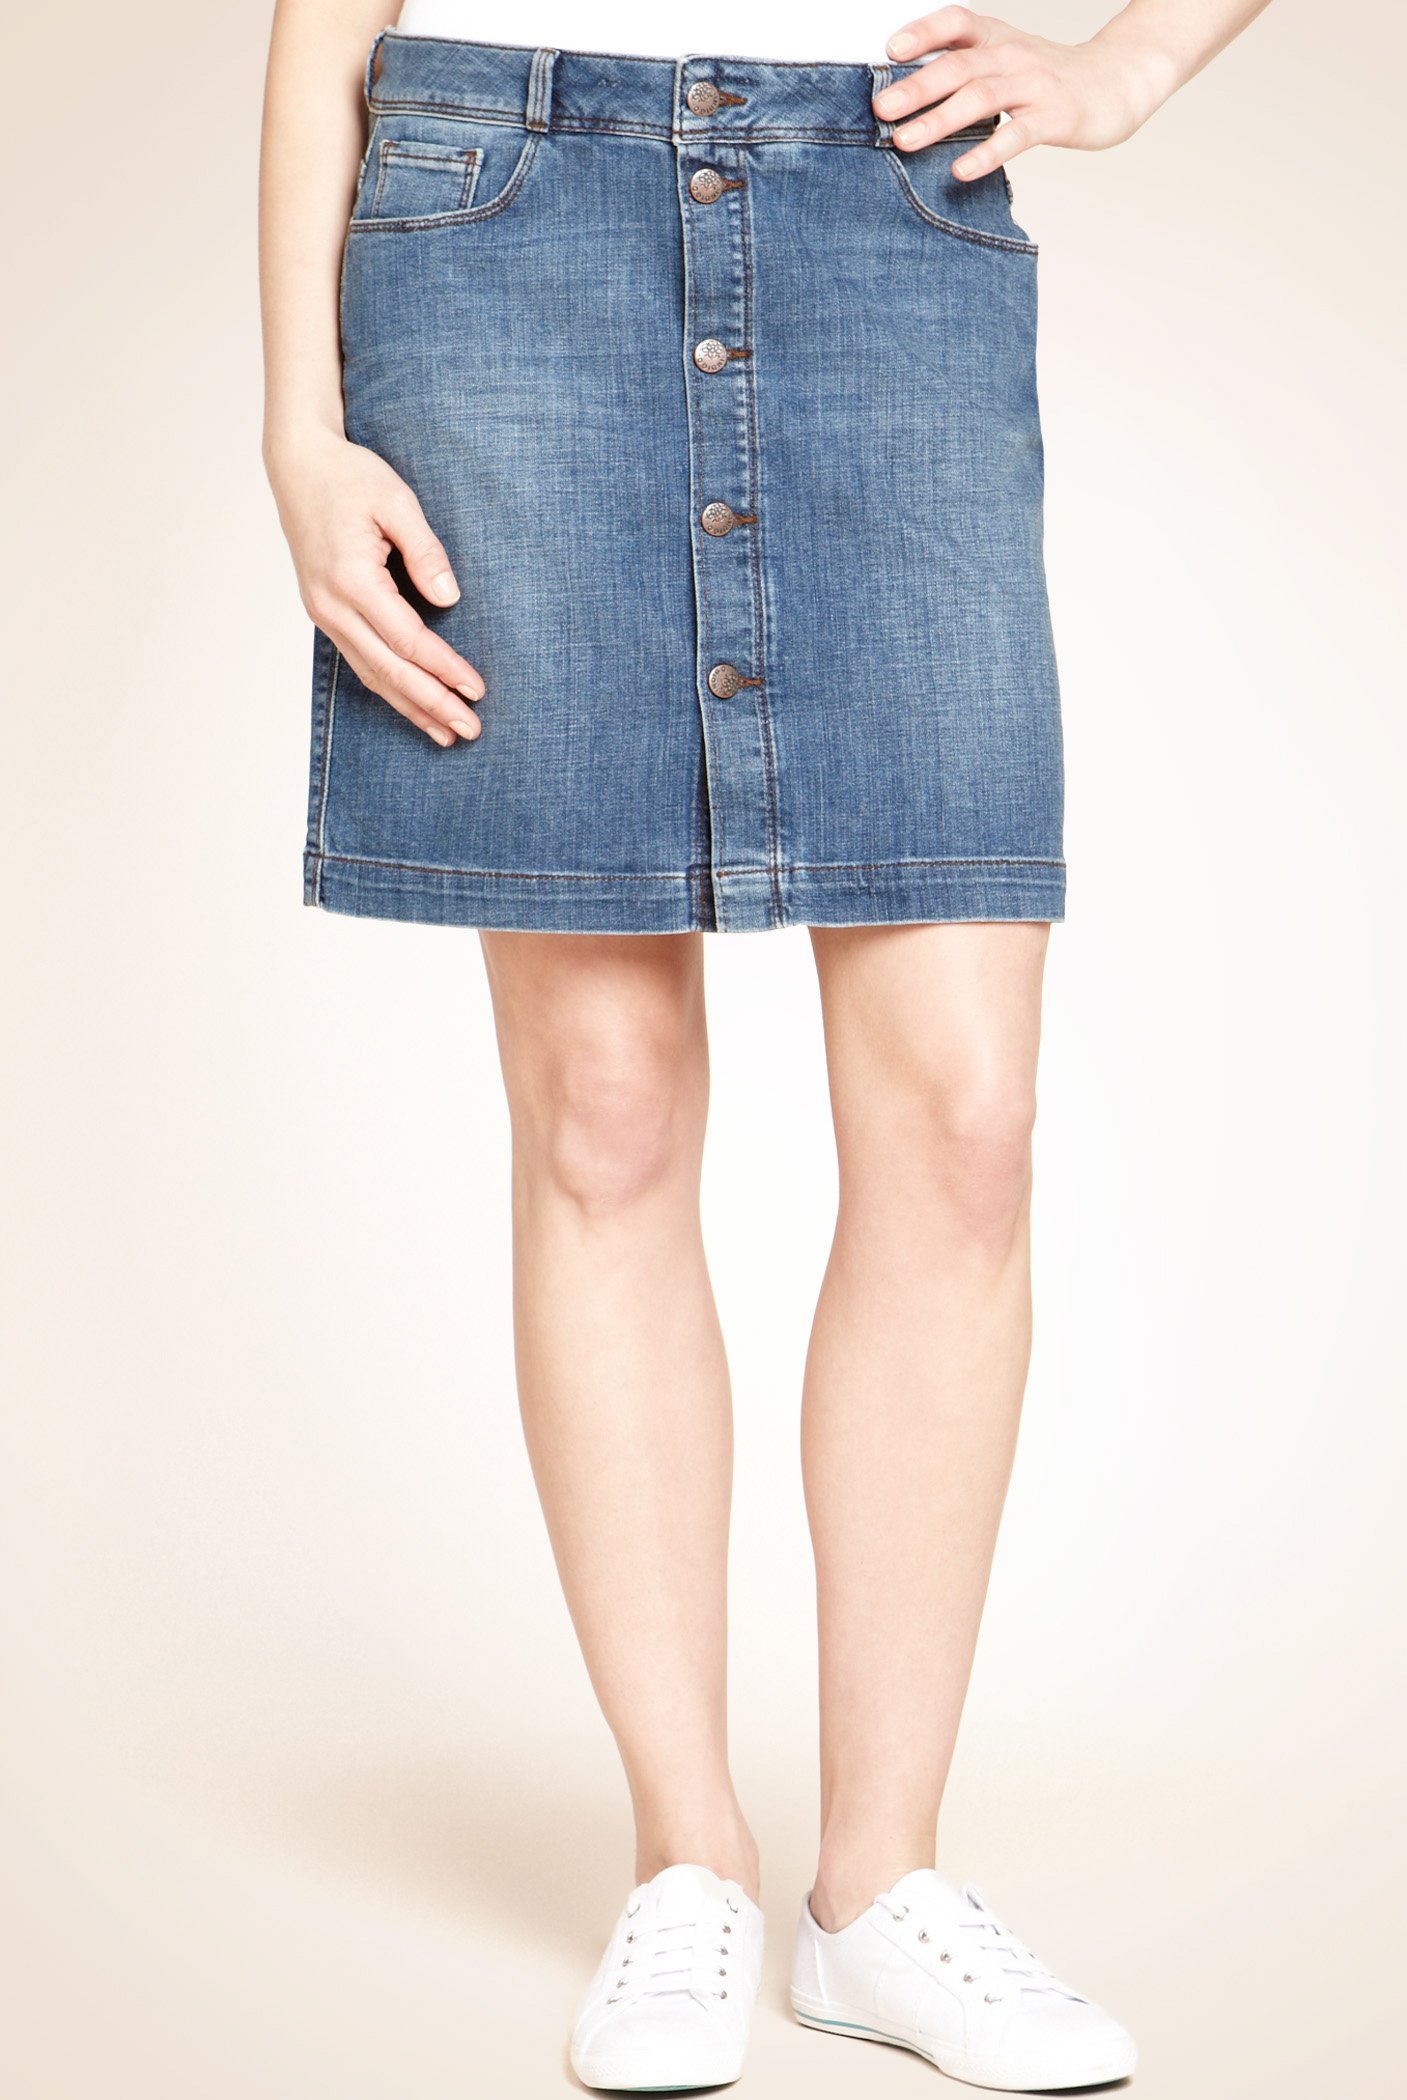 Marks and Spencer - - M&5 BLUE Cotton Rich Button-Down Denim Skirt ...